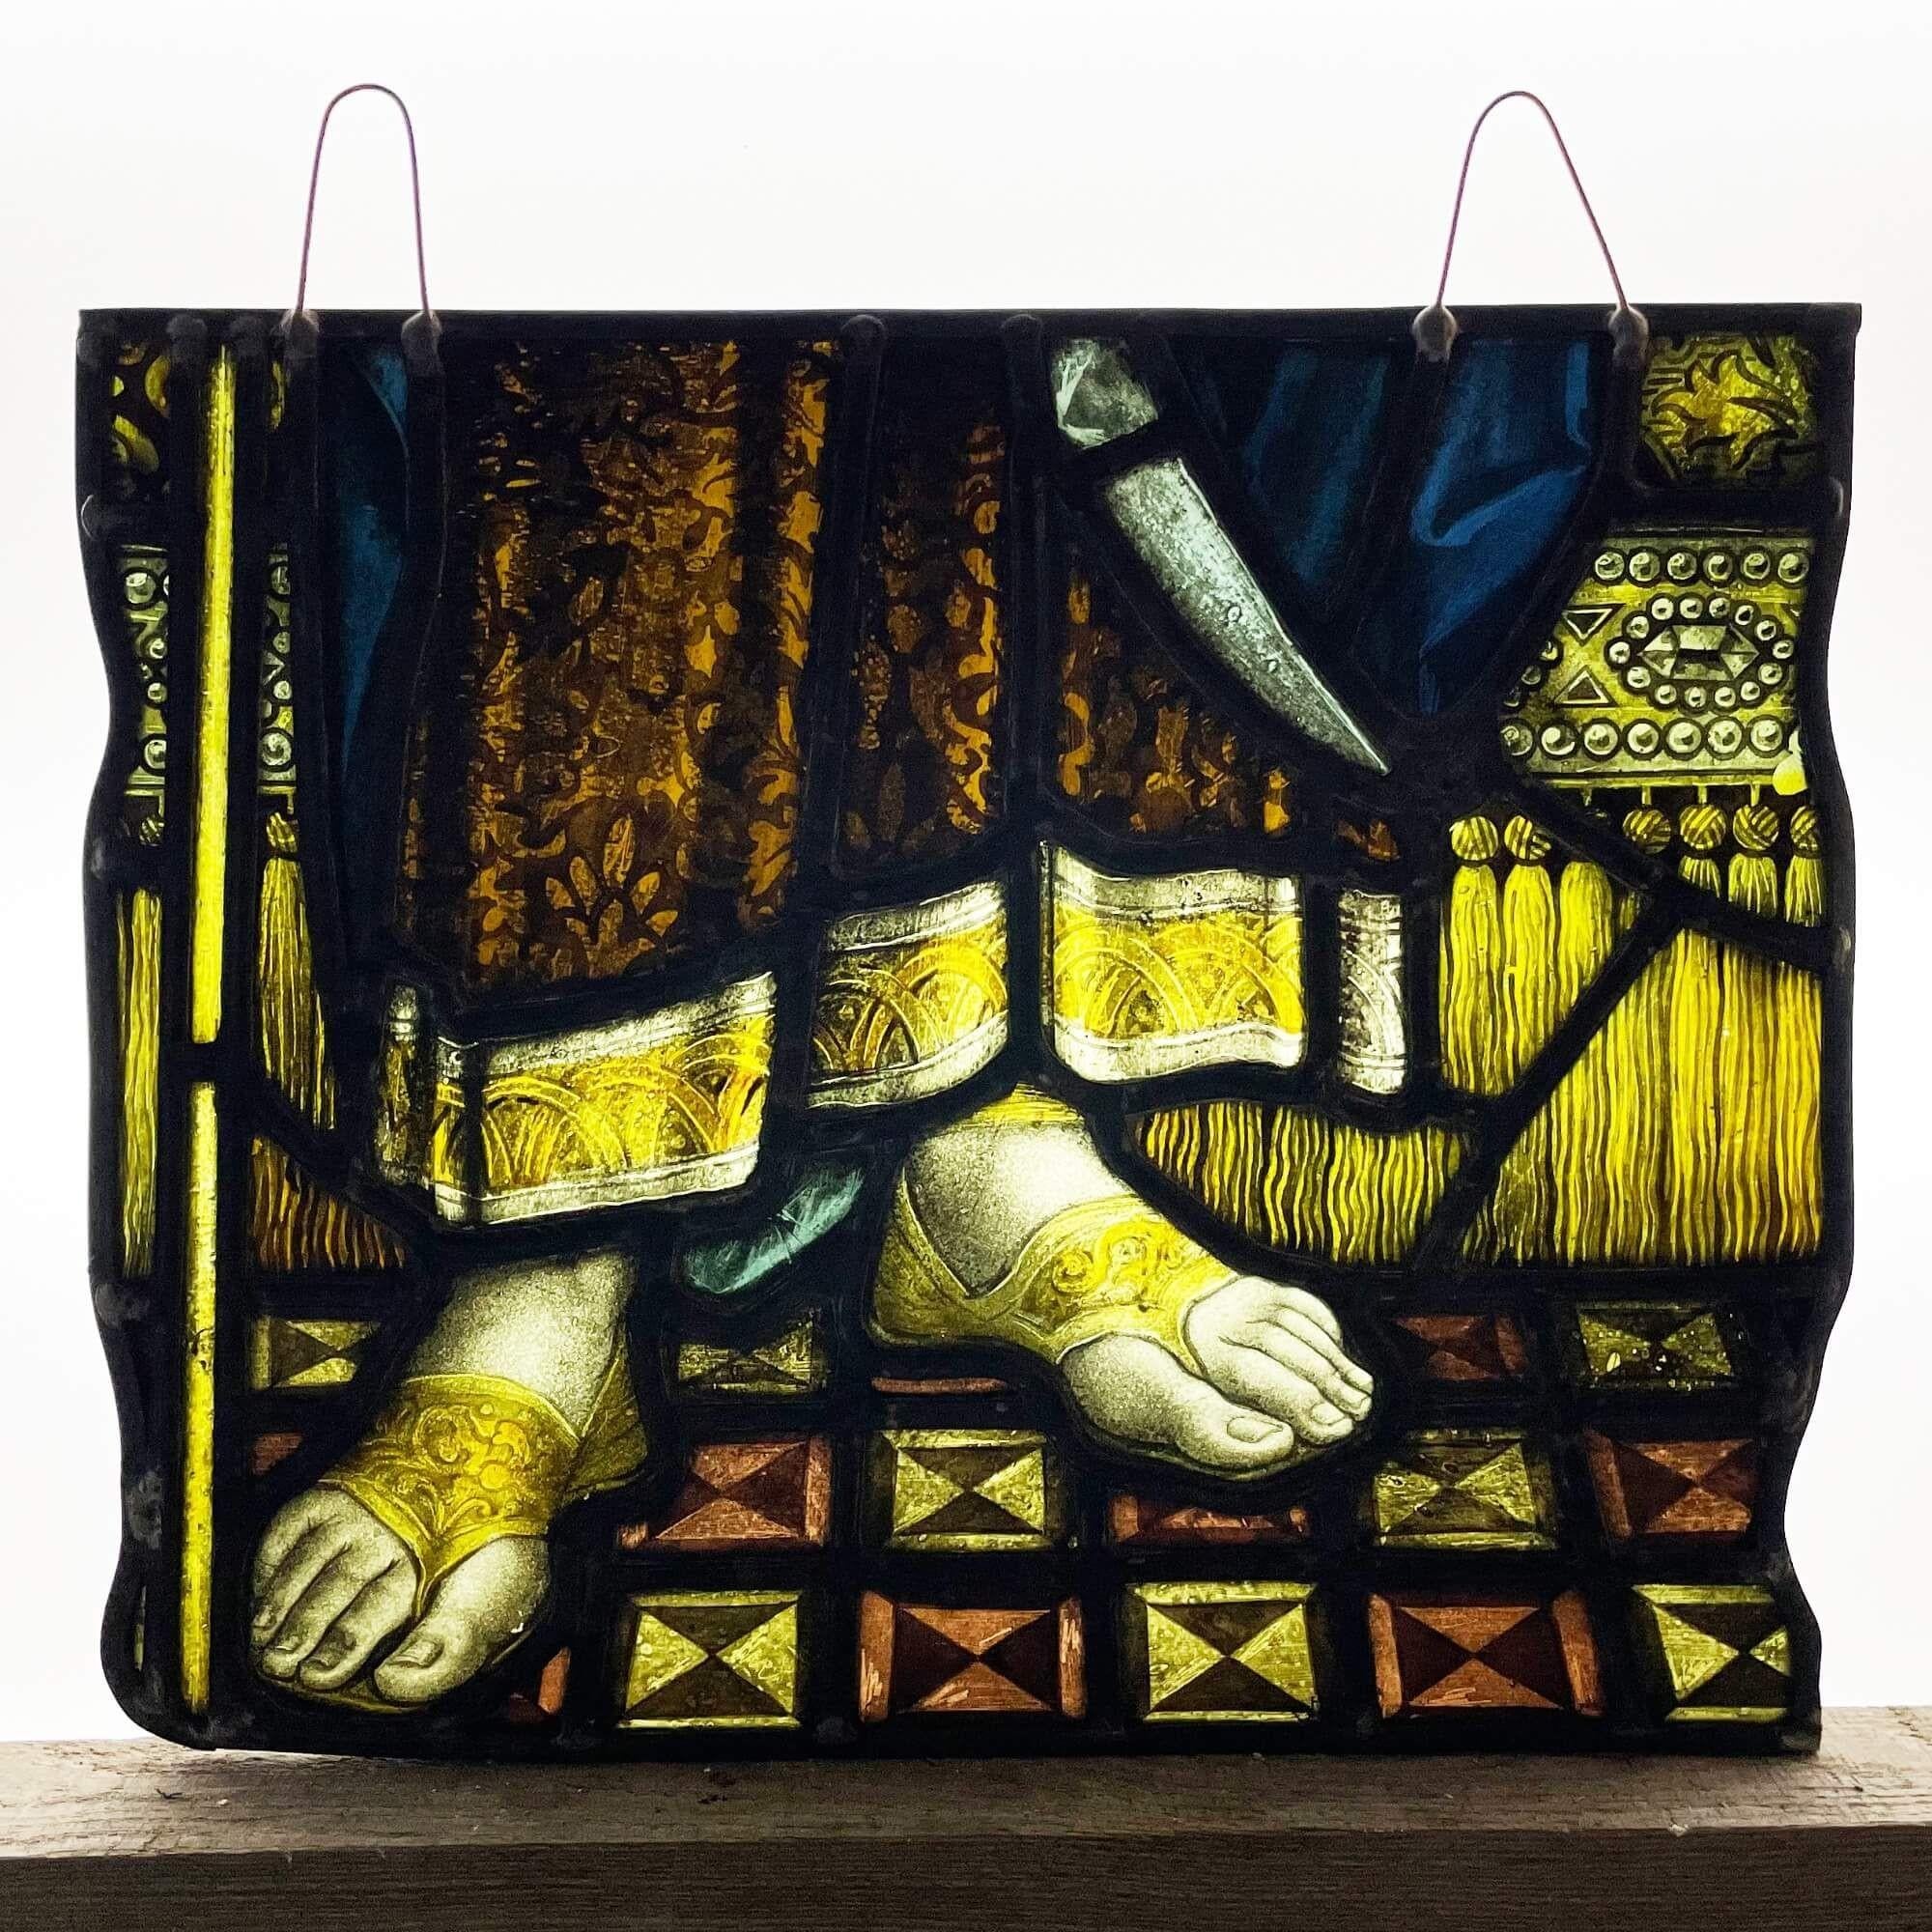 An antique stained glass window depicting the feet of a nobleman’s feet, dating to circa 1850. This English stained glass panel showcases a well painted vivid image of the nobleman’s feet in classical sandals from underneath his long patterned robe.